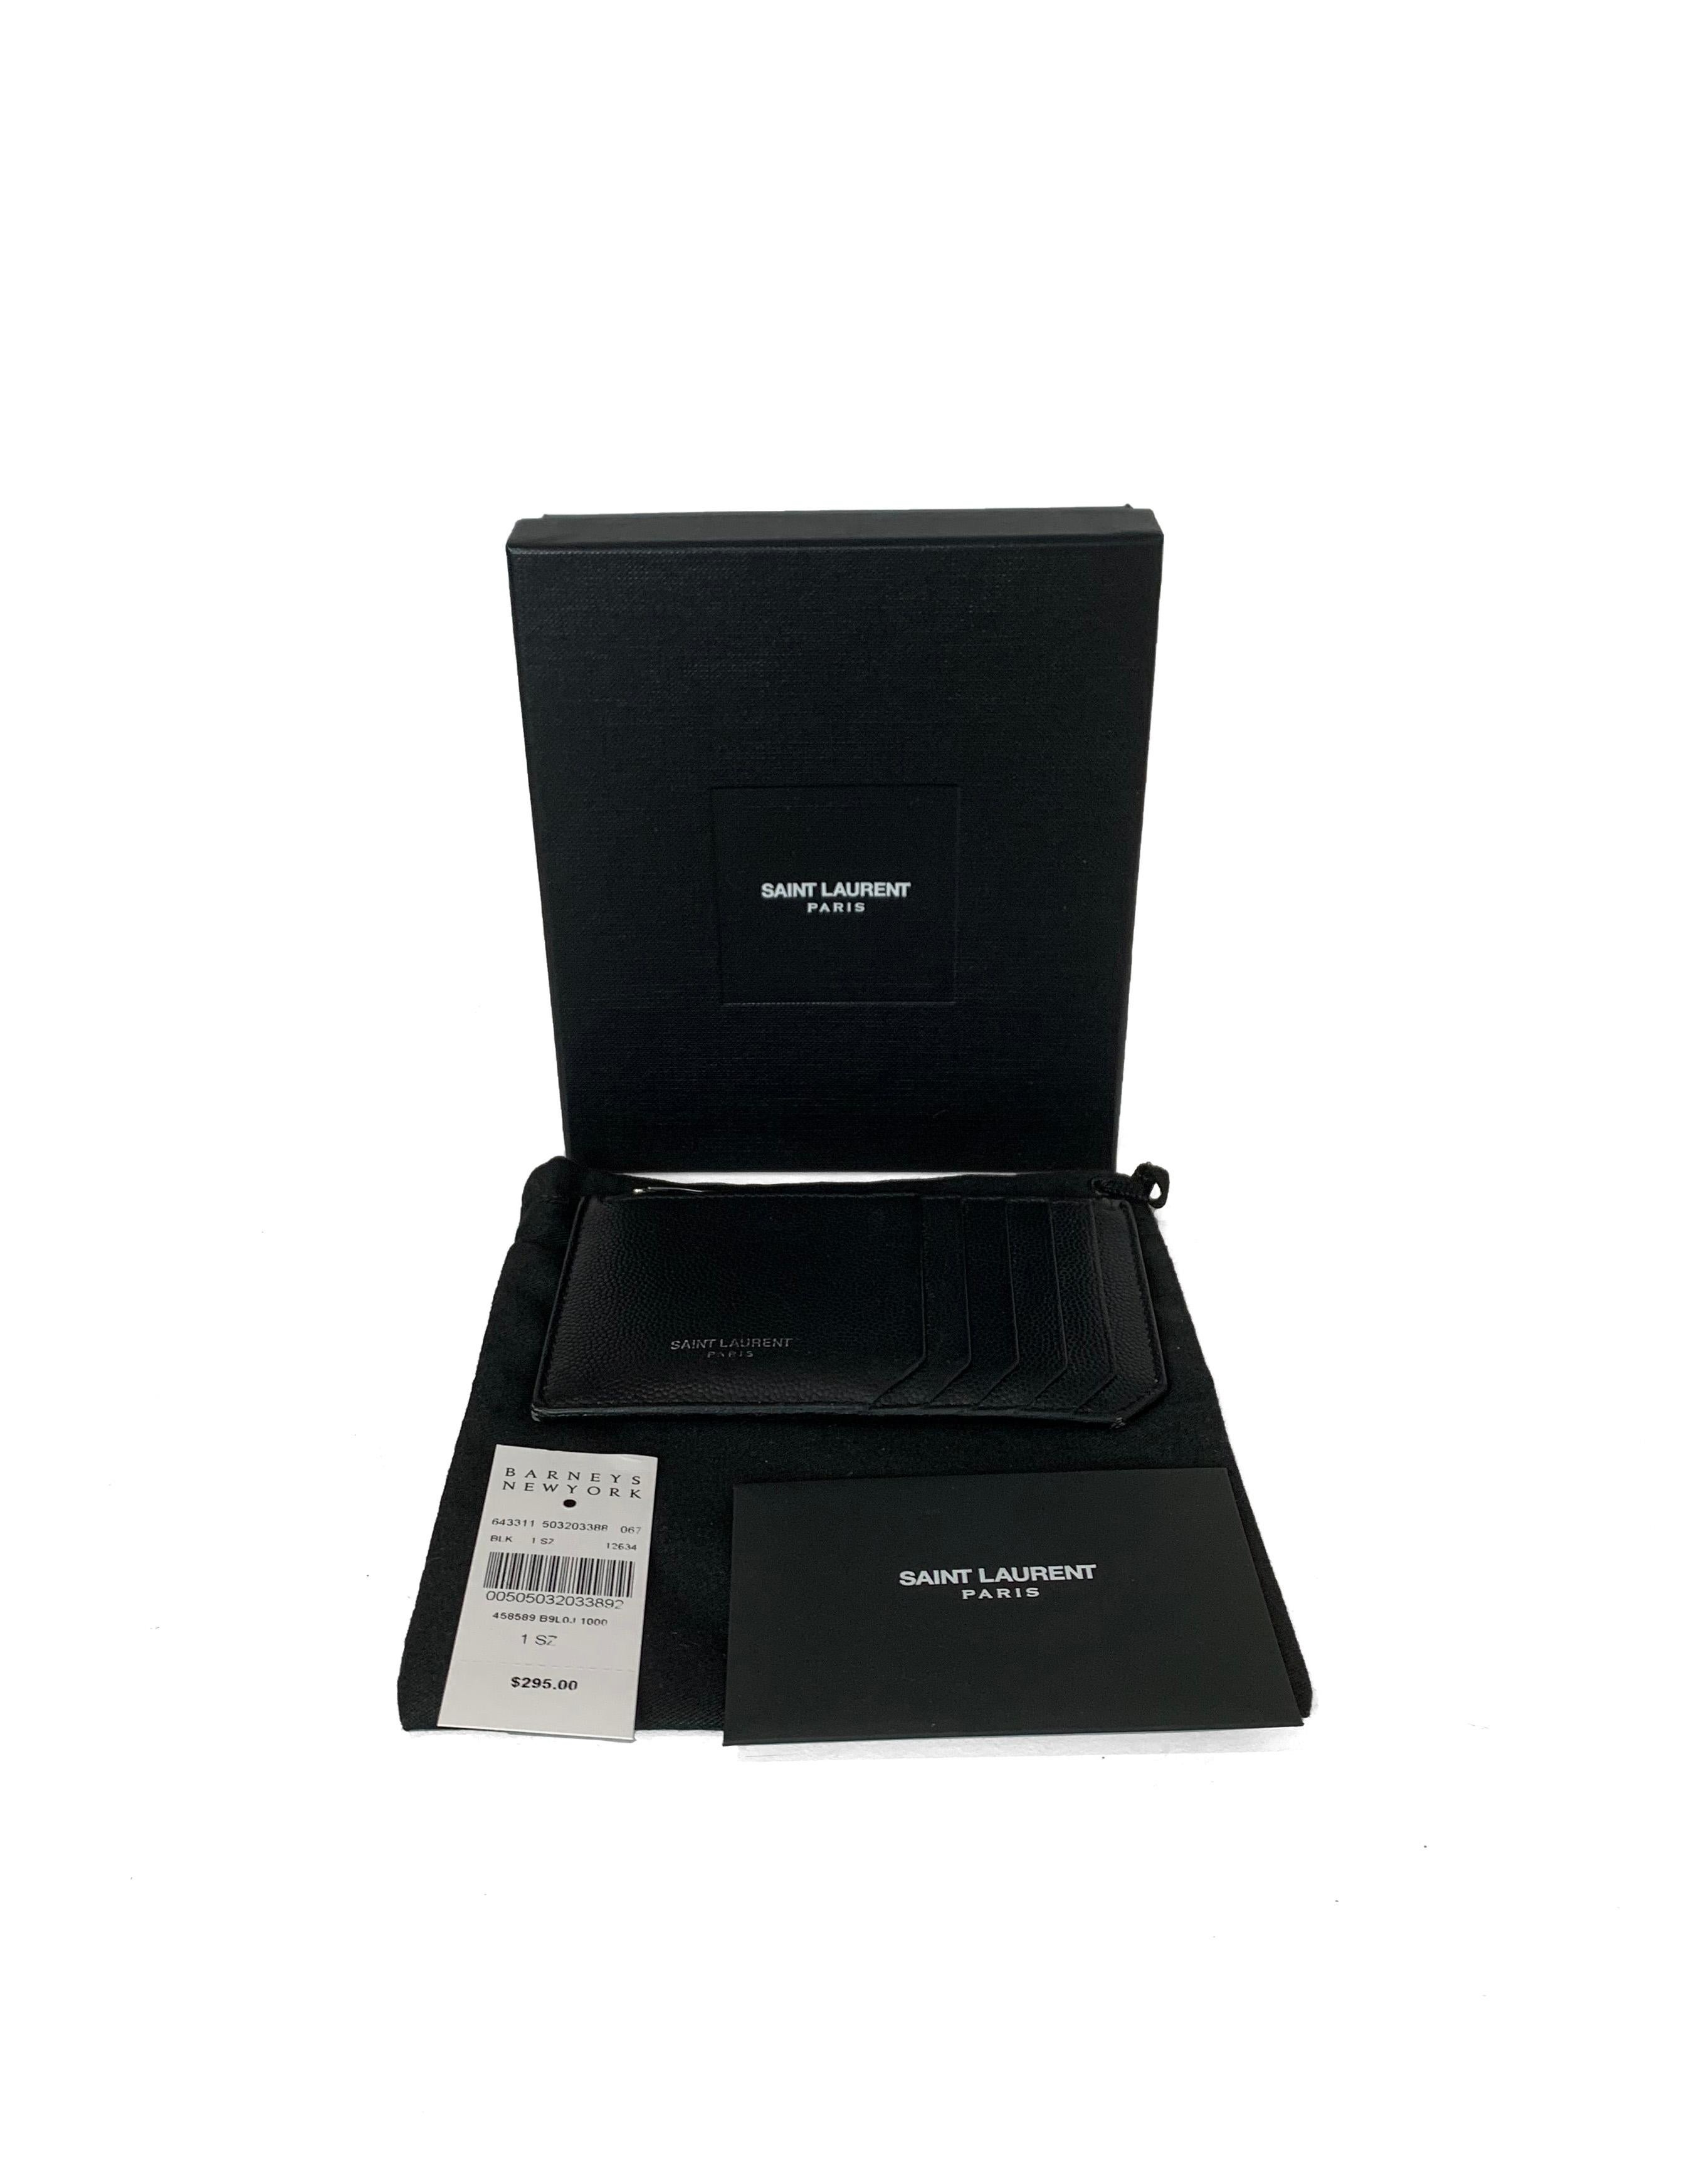 Saint Laurent Black Unisex Textured Leather Zip Top Card Holder

Made In:Italy
Color:Black
Hardware:Silvertone
Materials: Textured leather
Lining: Smooth leather
Closure/Opening: Zip top
Exterior Pockets: Five card slots
Interior Pockets: One zip